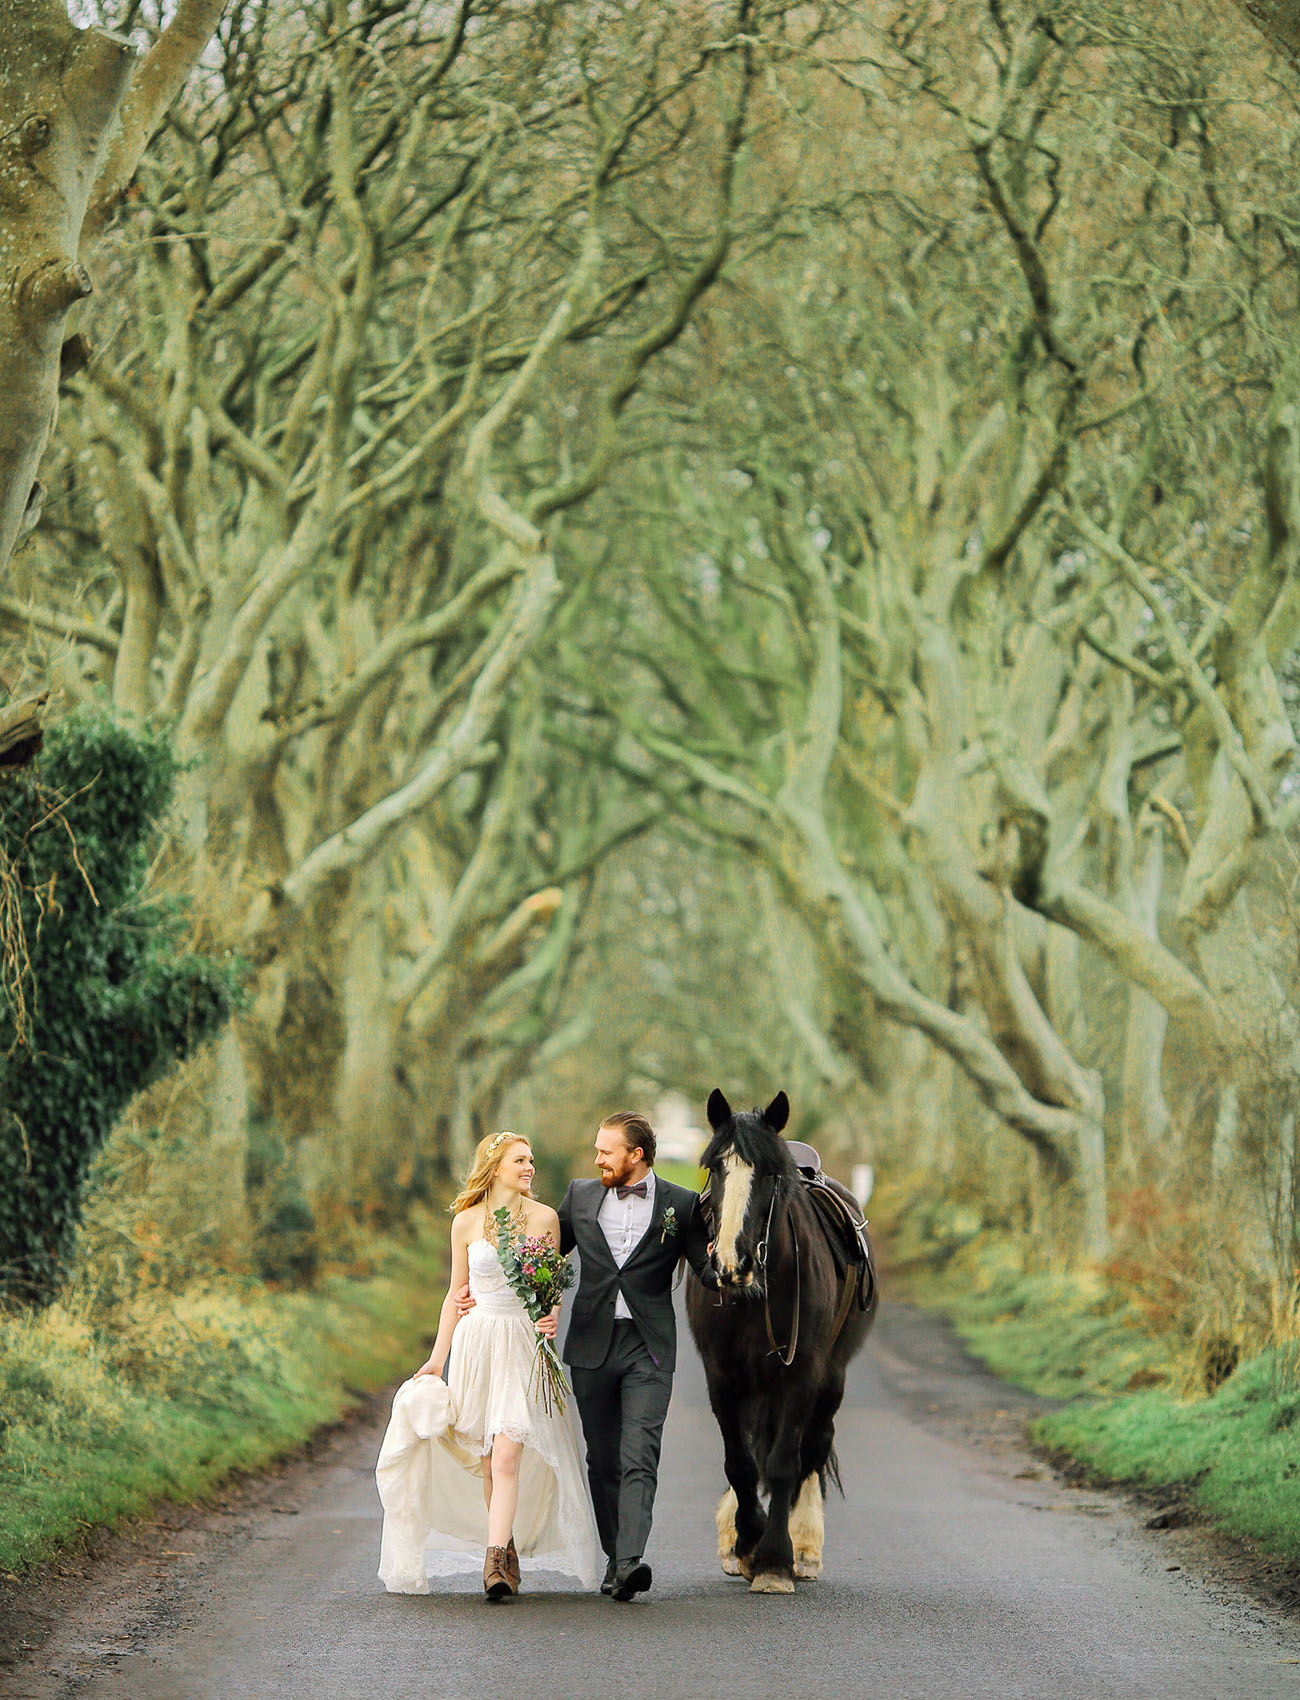 Elopement with a Horse